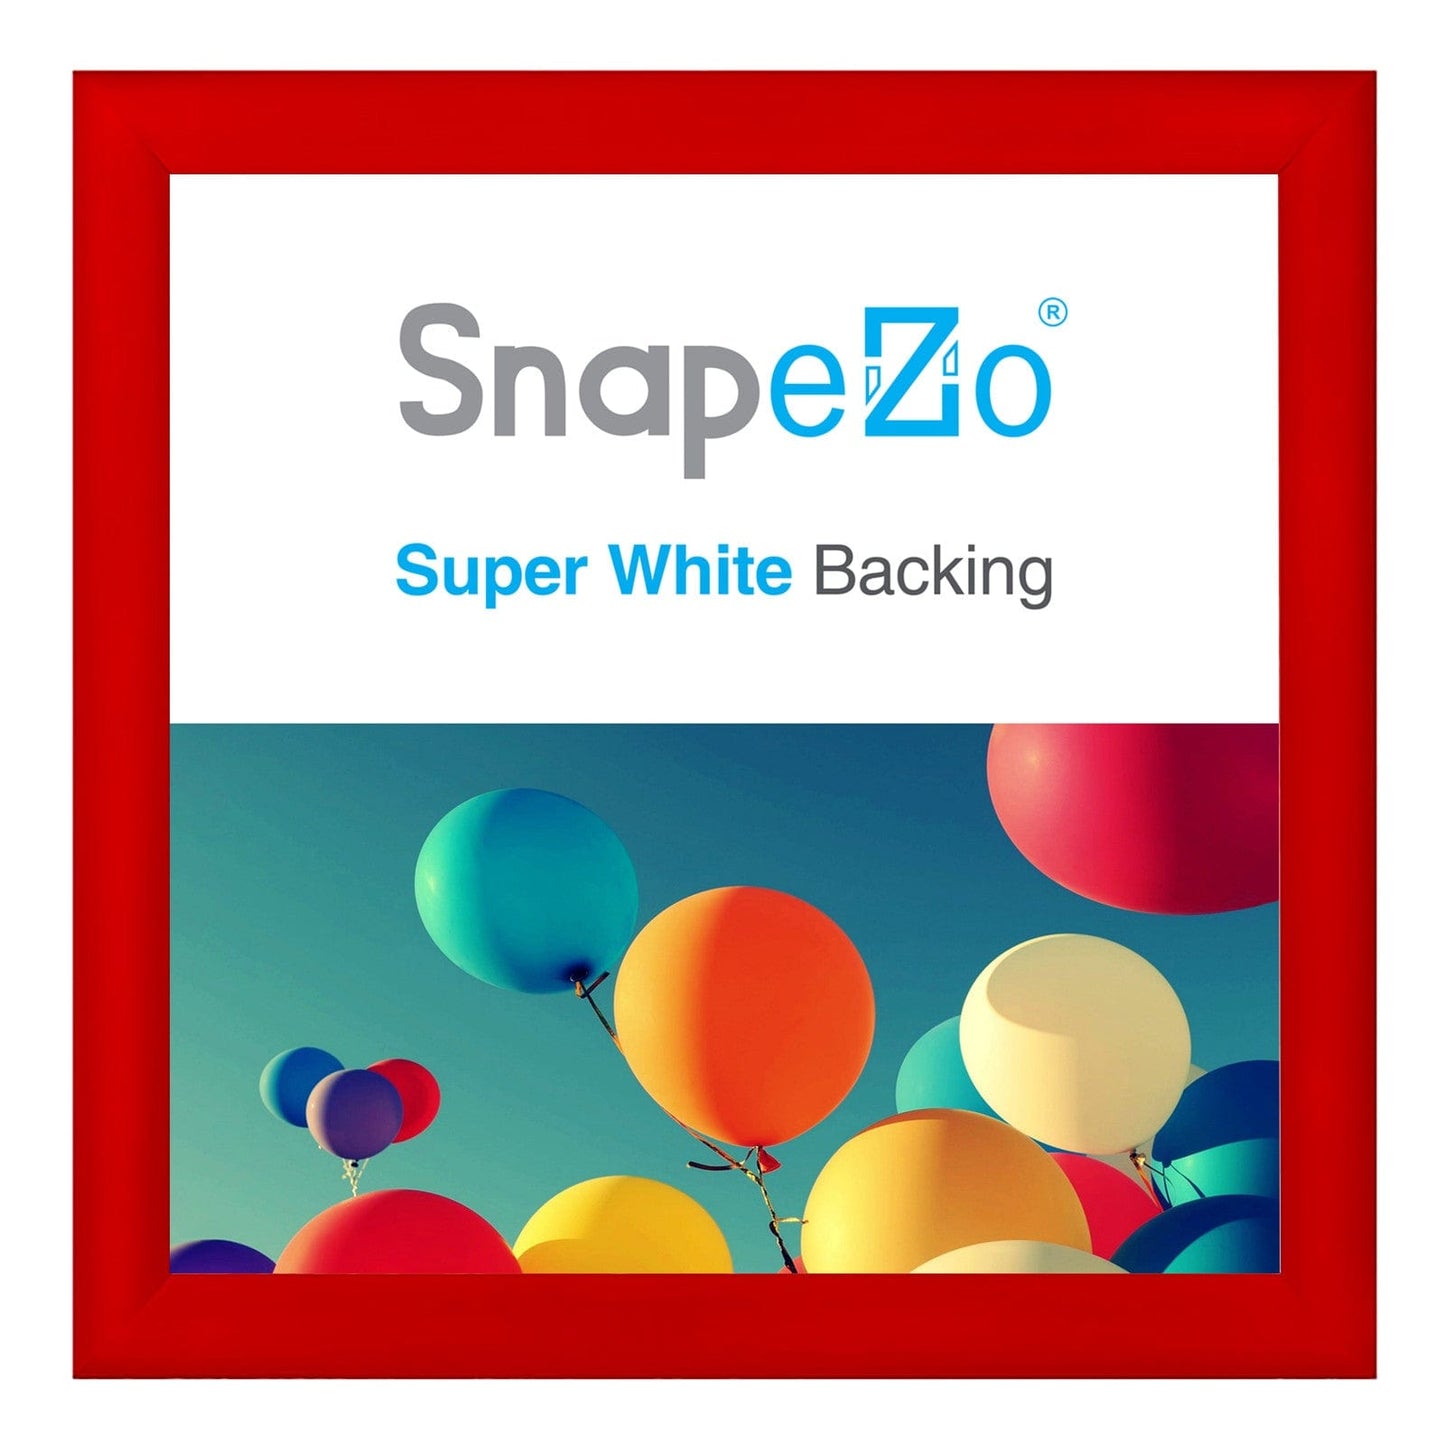 25x25 Red SnapeZo® Snap Frame - 1.2" Profile - Snap Frames Direct